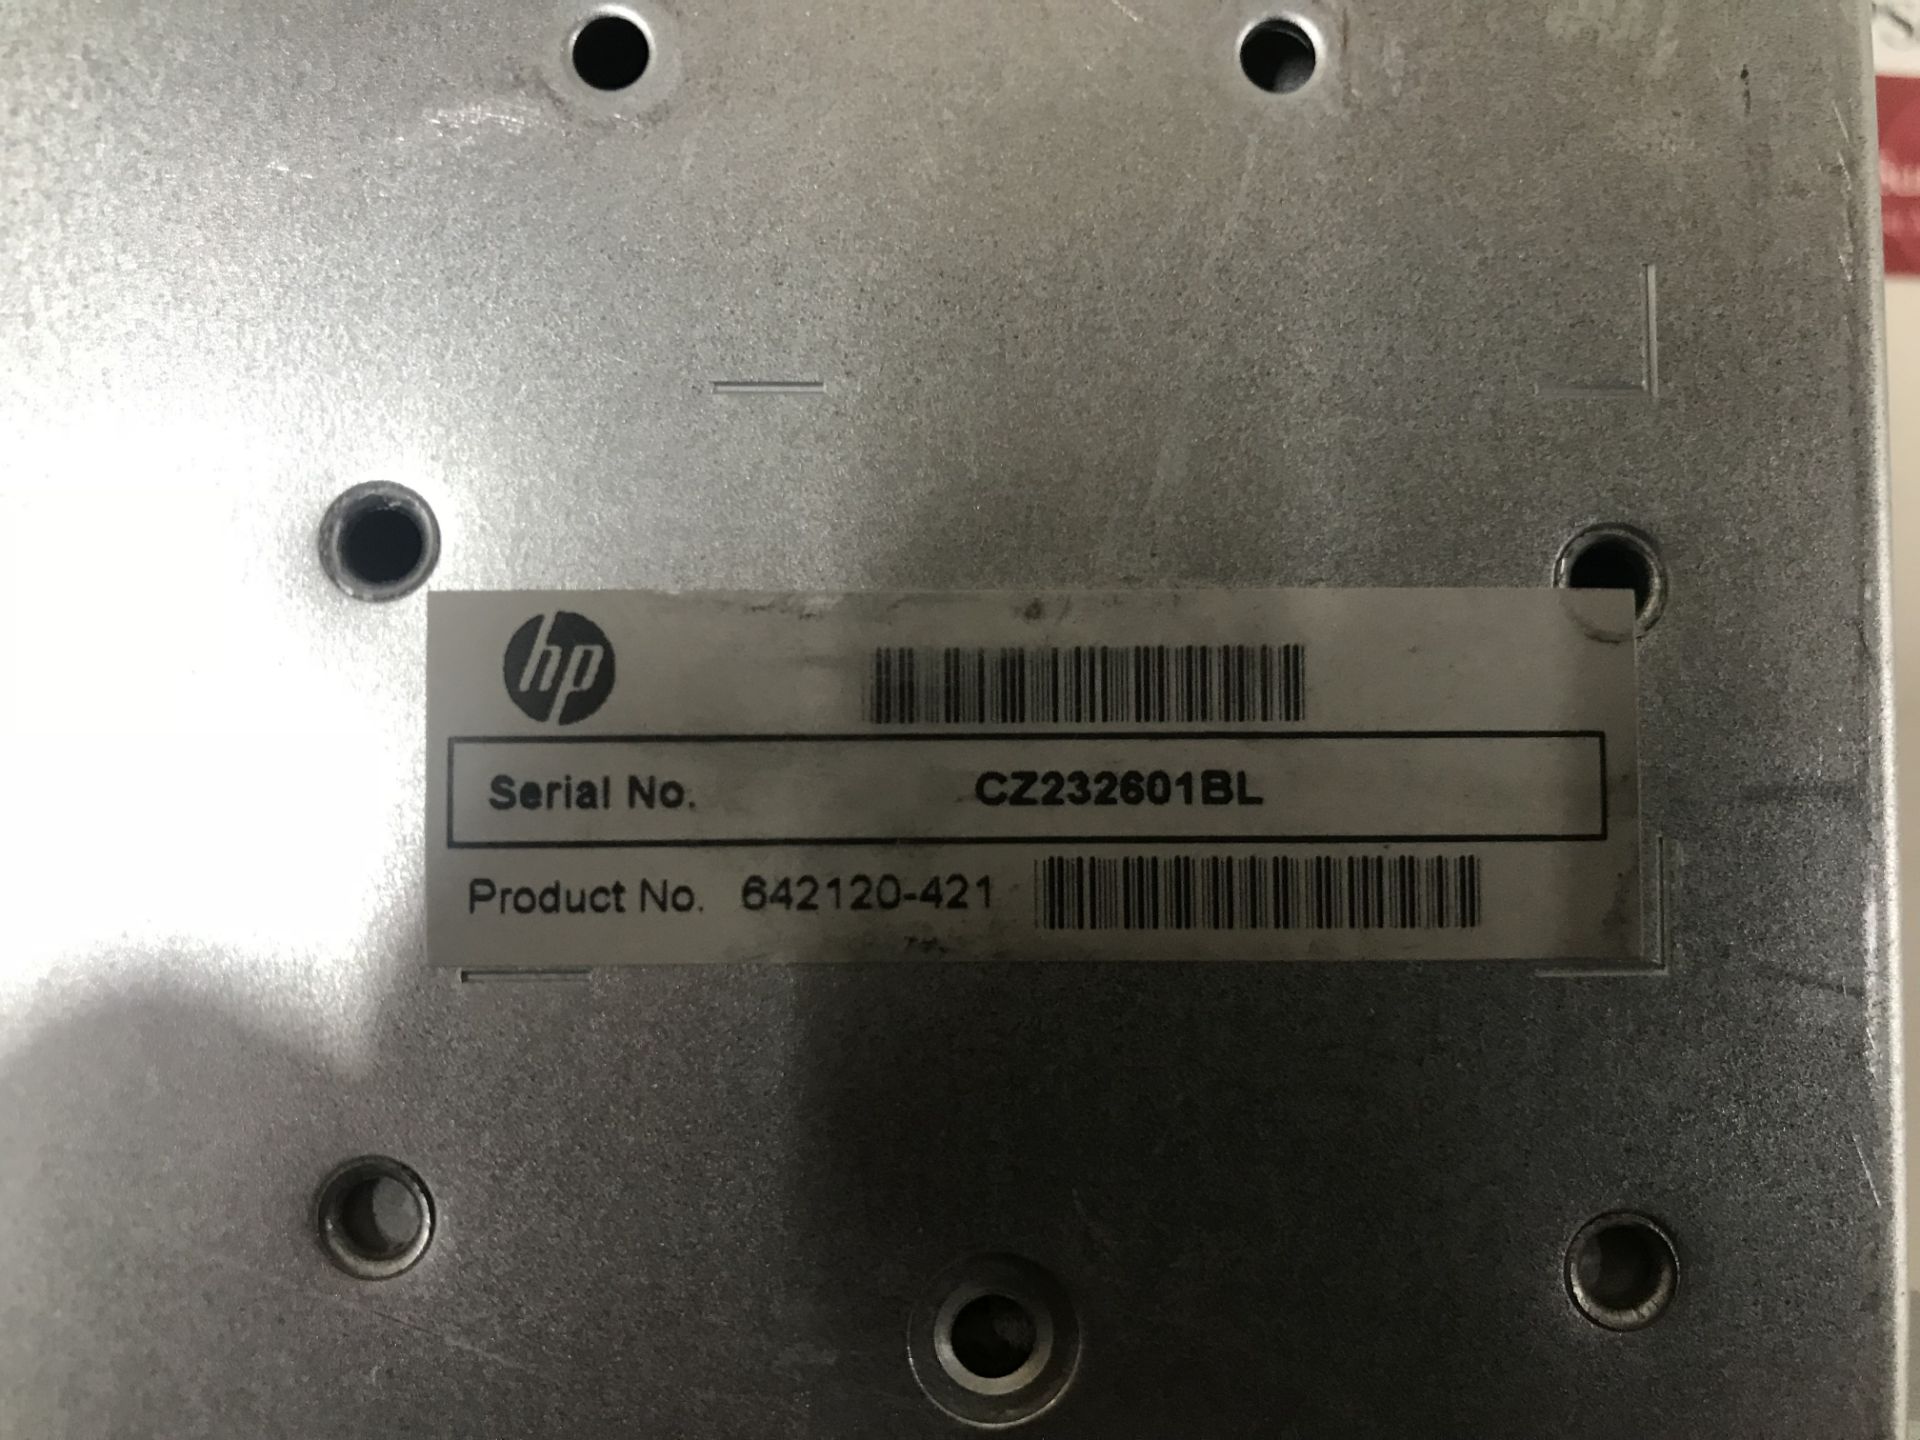 HP Proliant Server Unit with 6 x 450GB HDD - Image 7 of 8